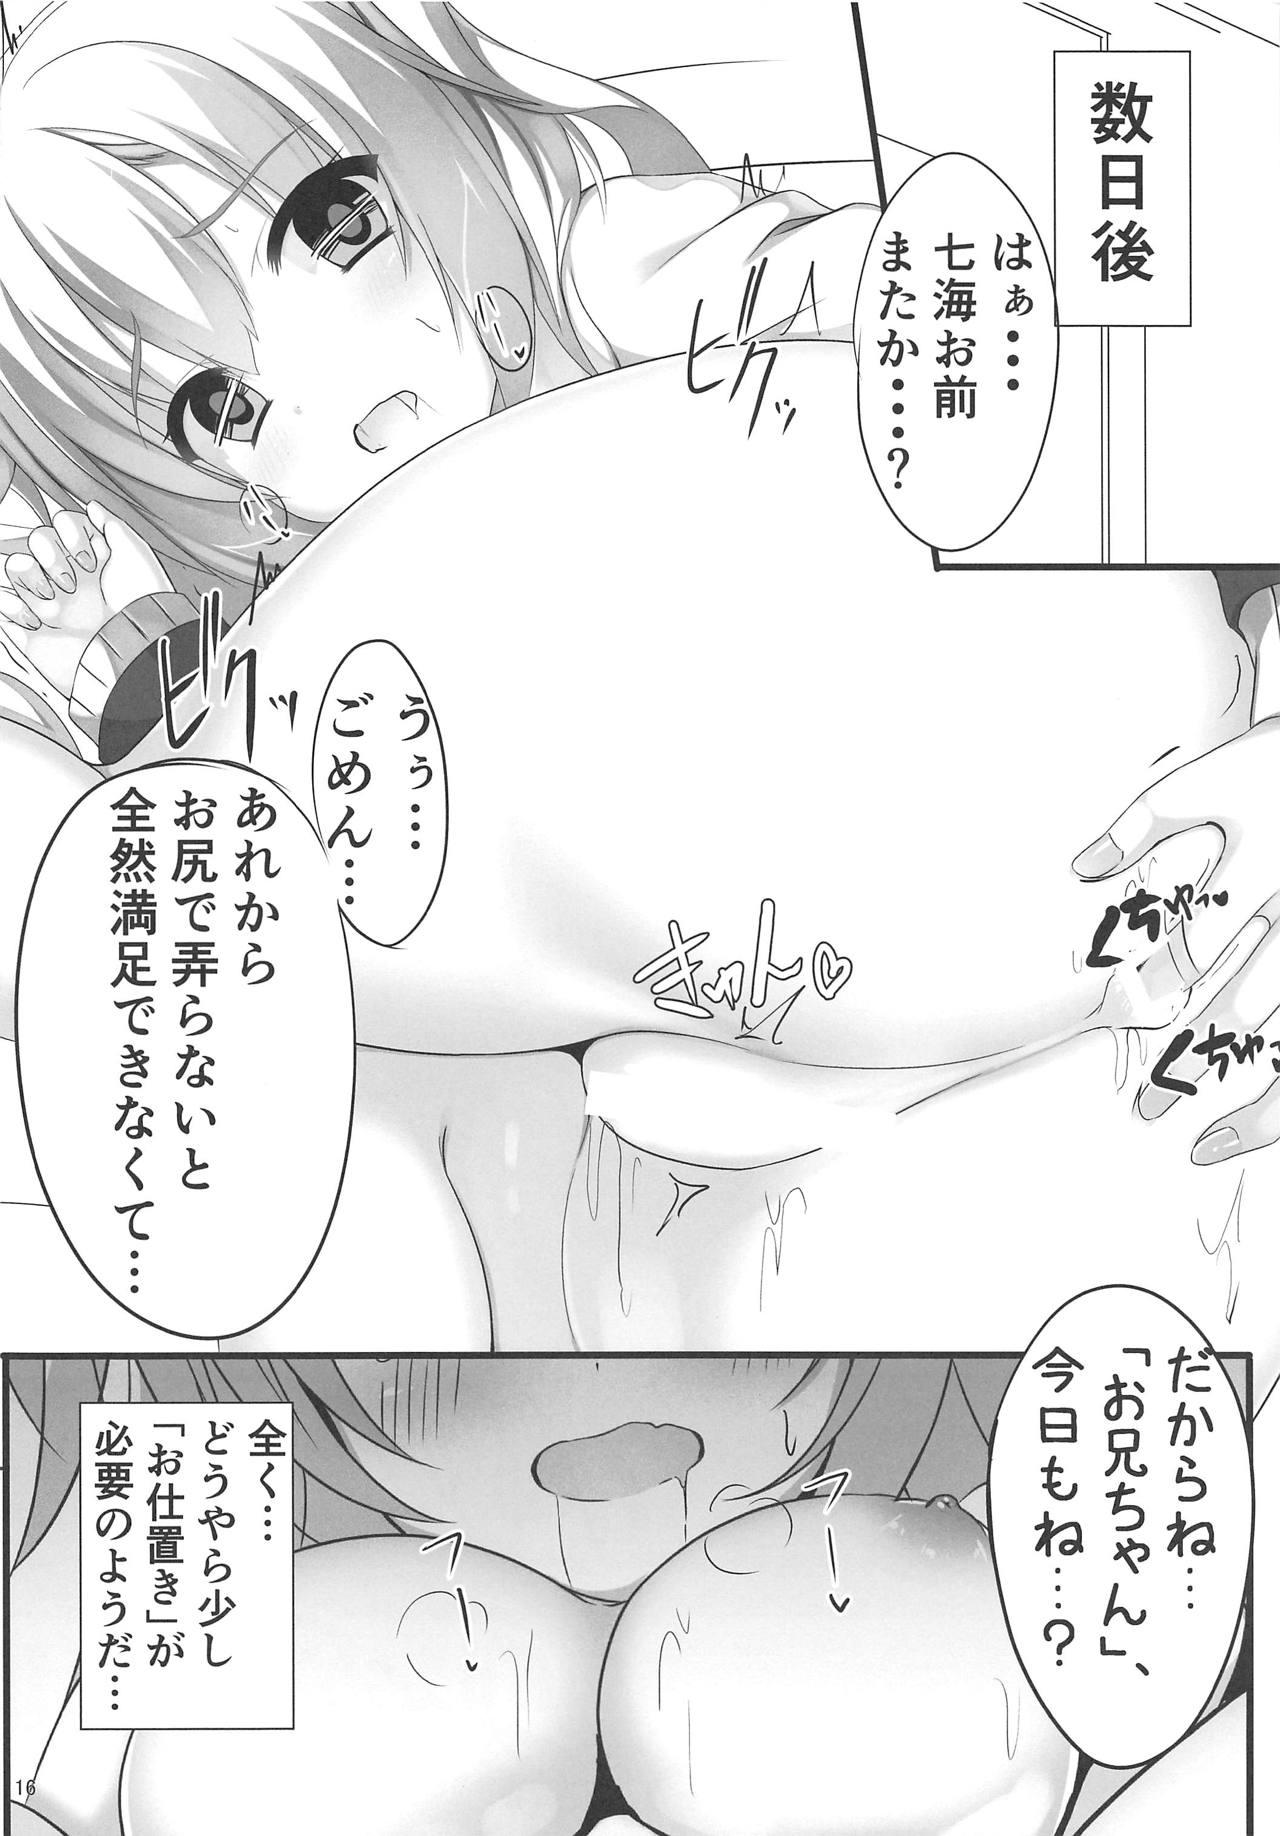 Teensnow Onii-chan ni Asstral! - Riddle joker Que - Page 15